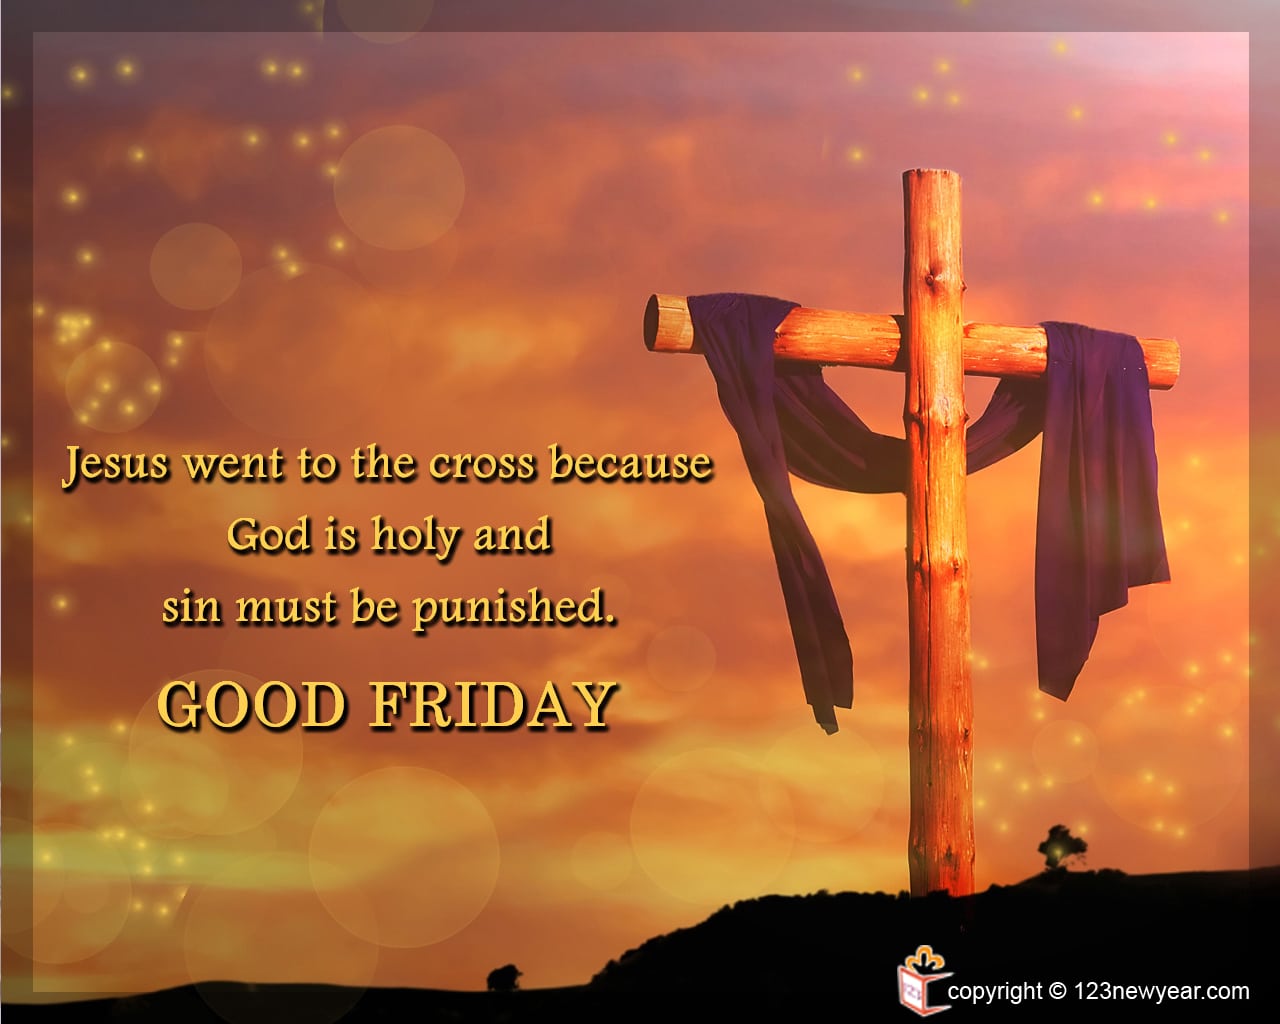 Good Friday 2017 Sayings Images